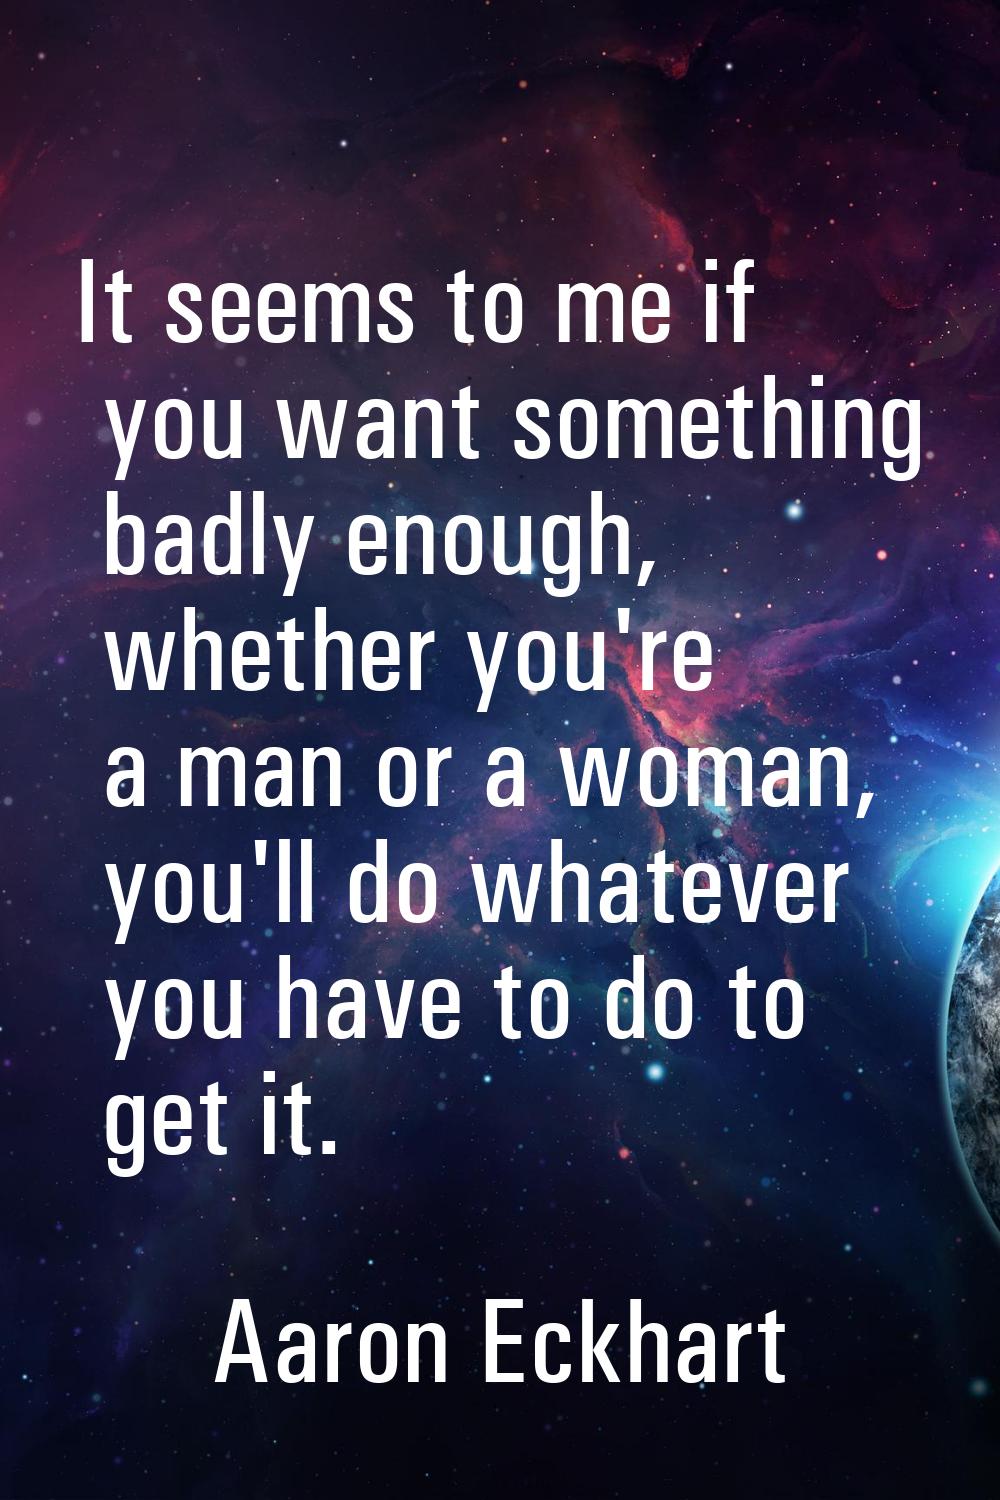 It seems to me if you want something badly enough, whether you're a man or a woman, you'll do whate